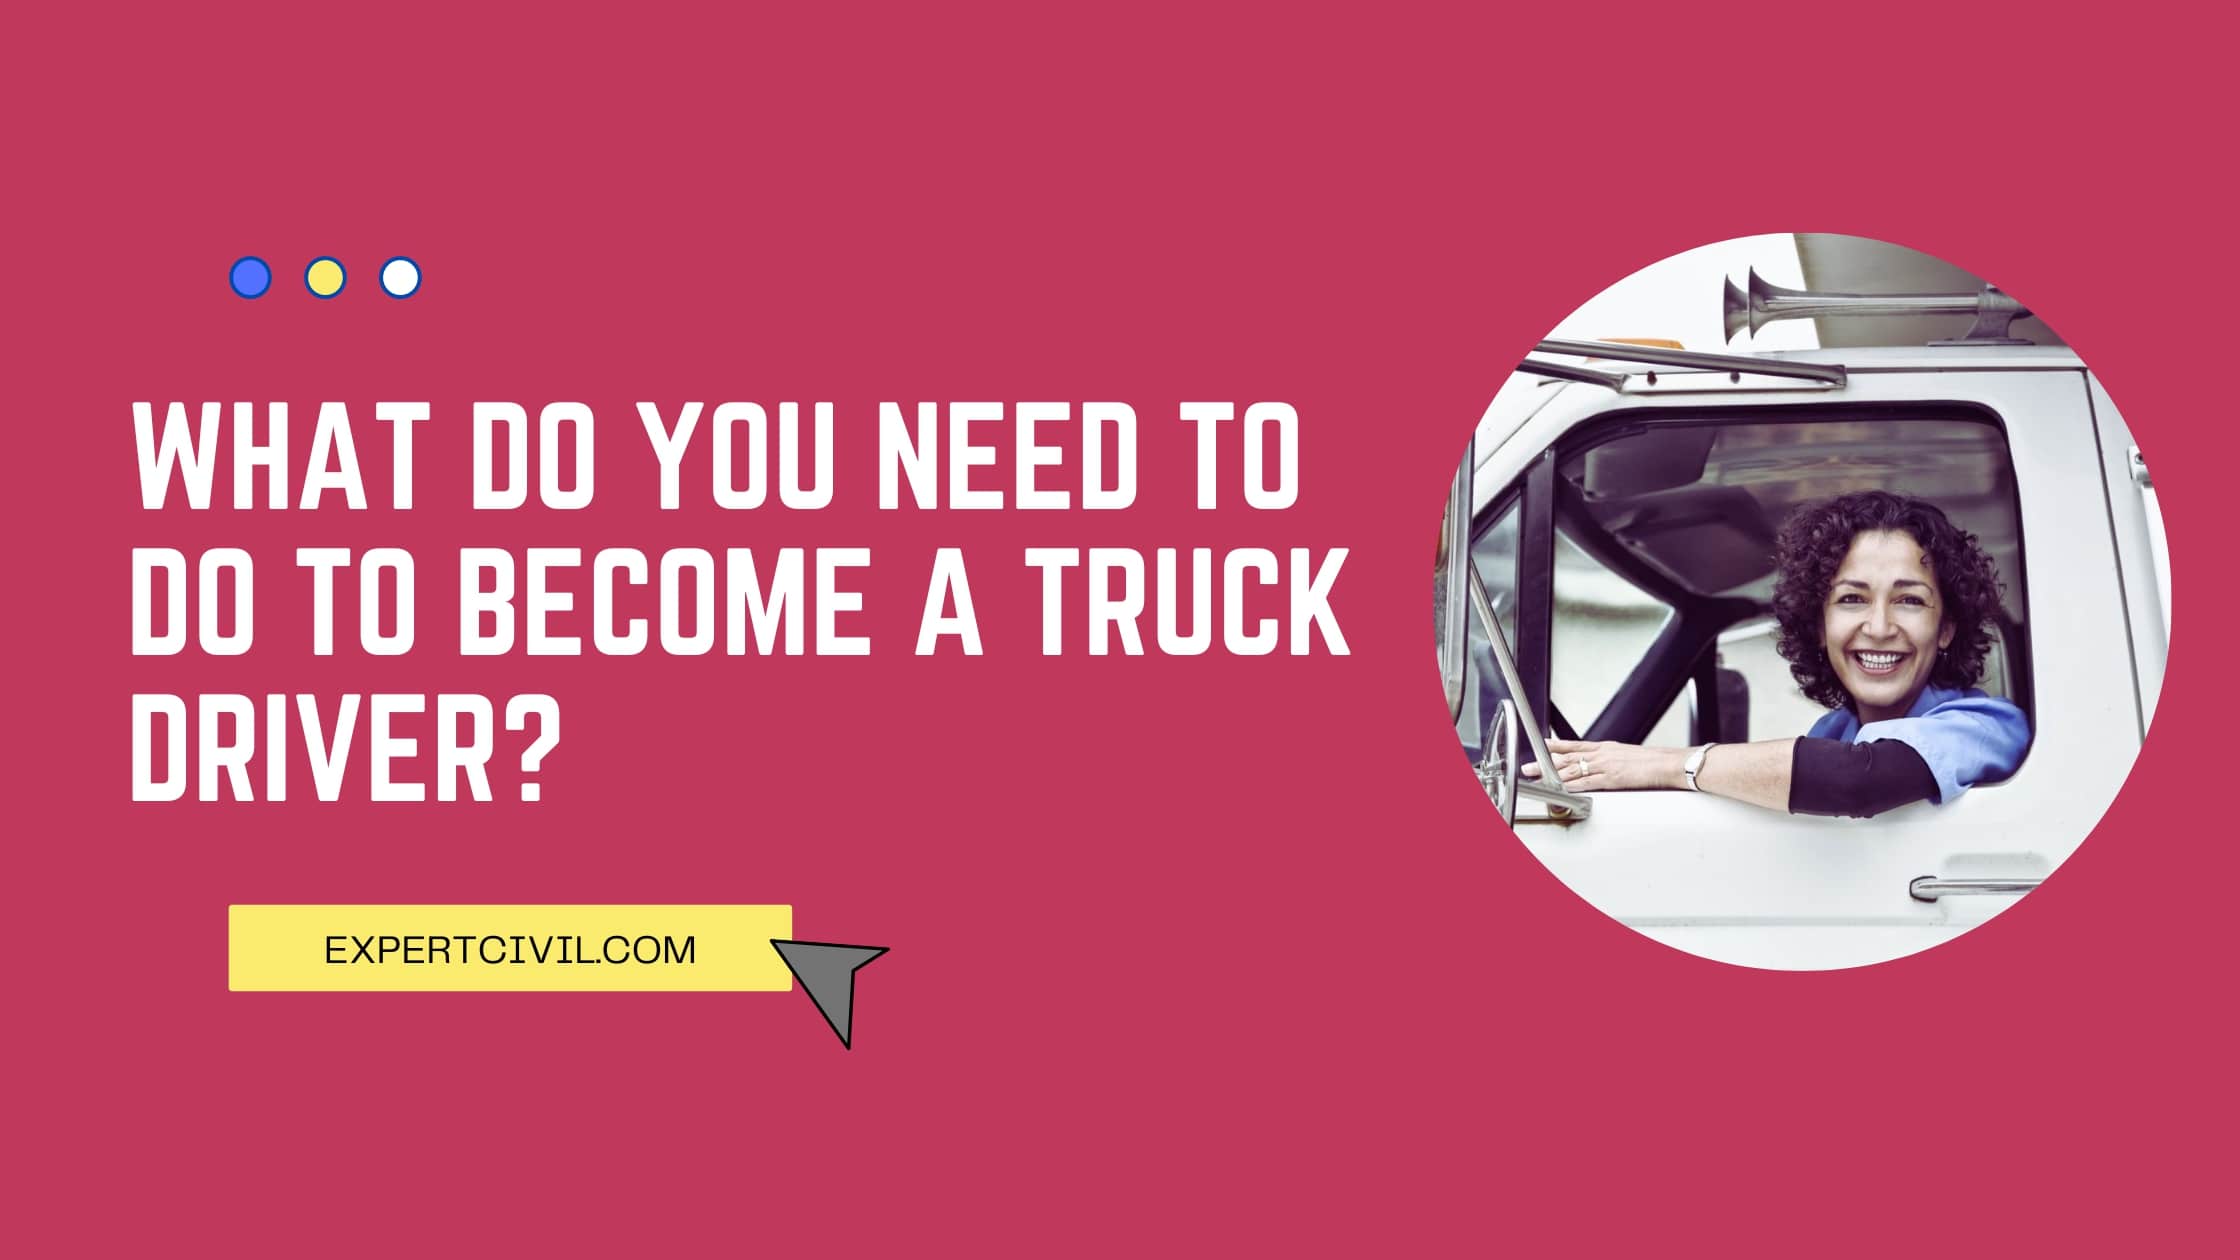 What do you need to do to become a truck driver?